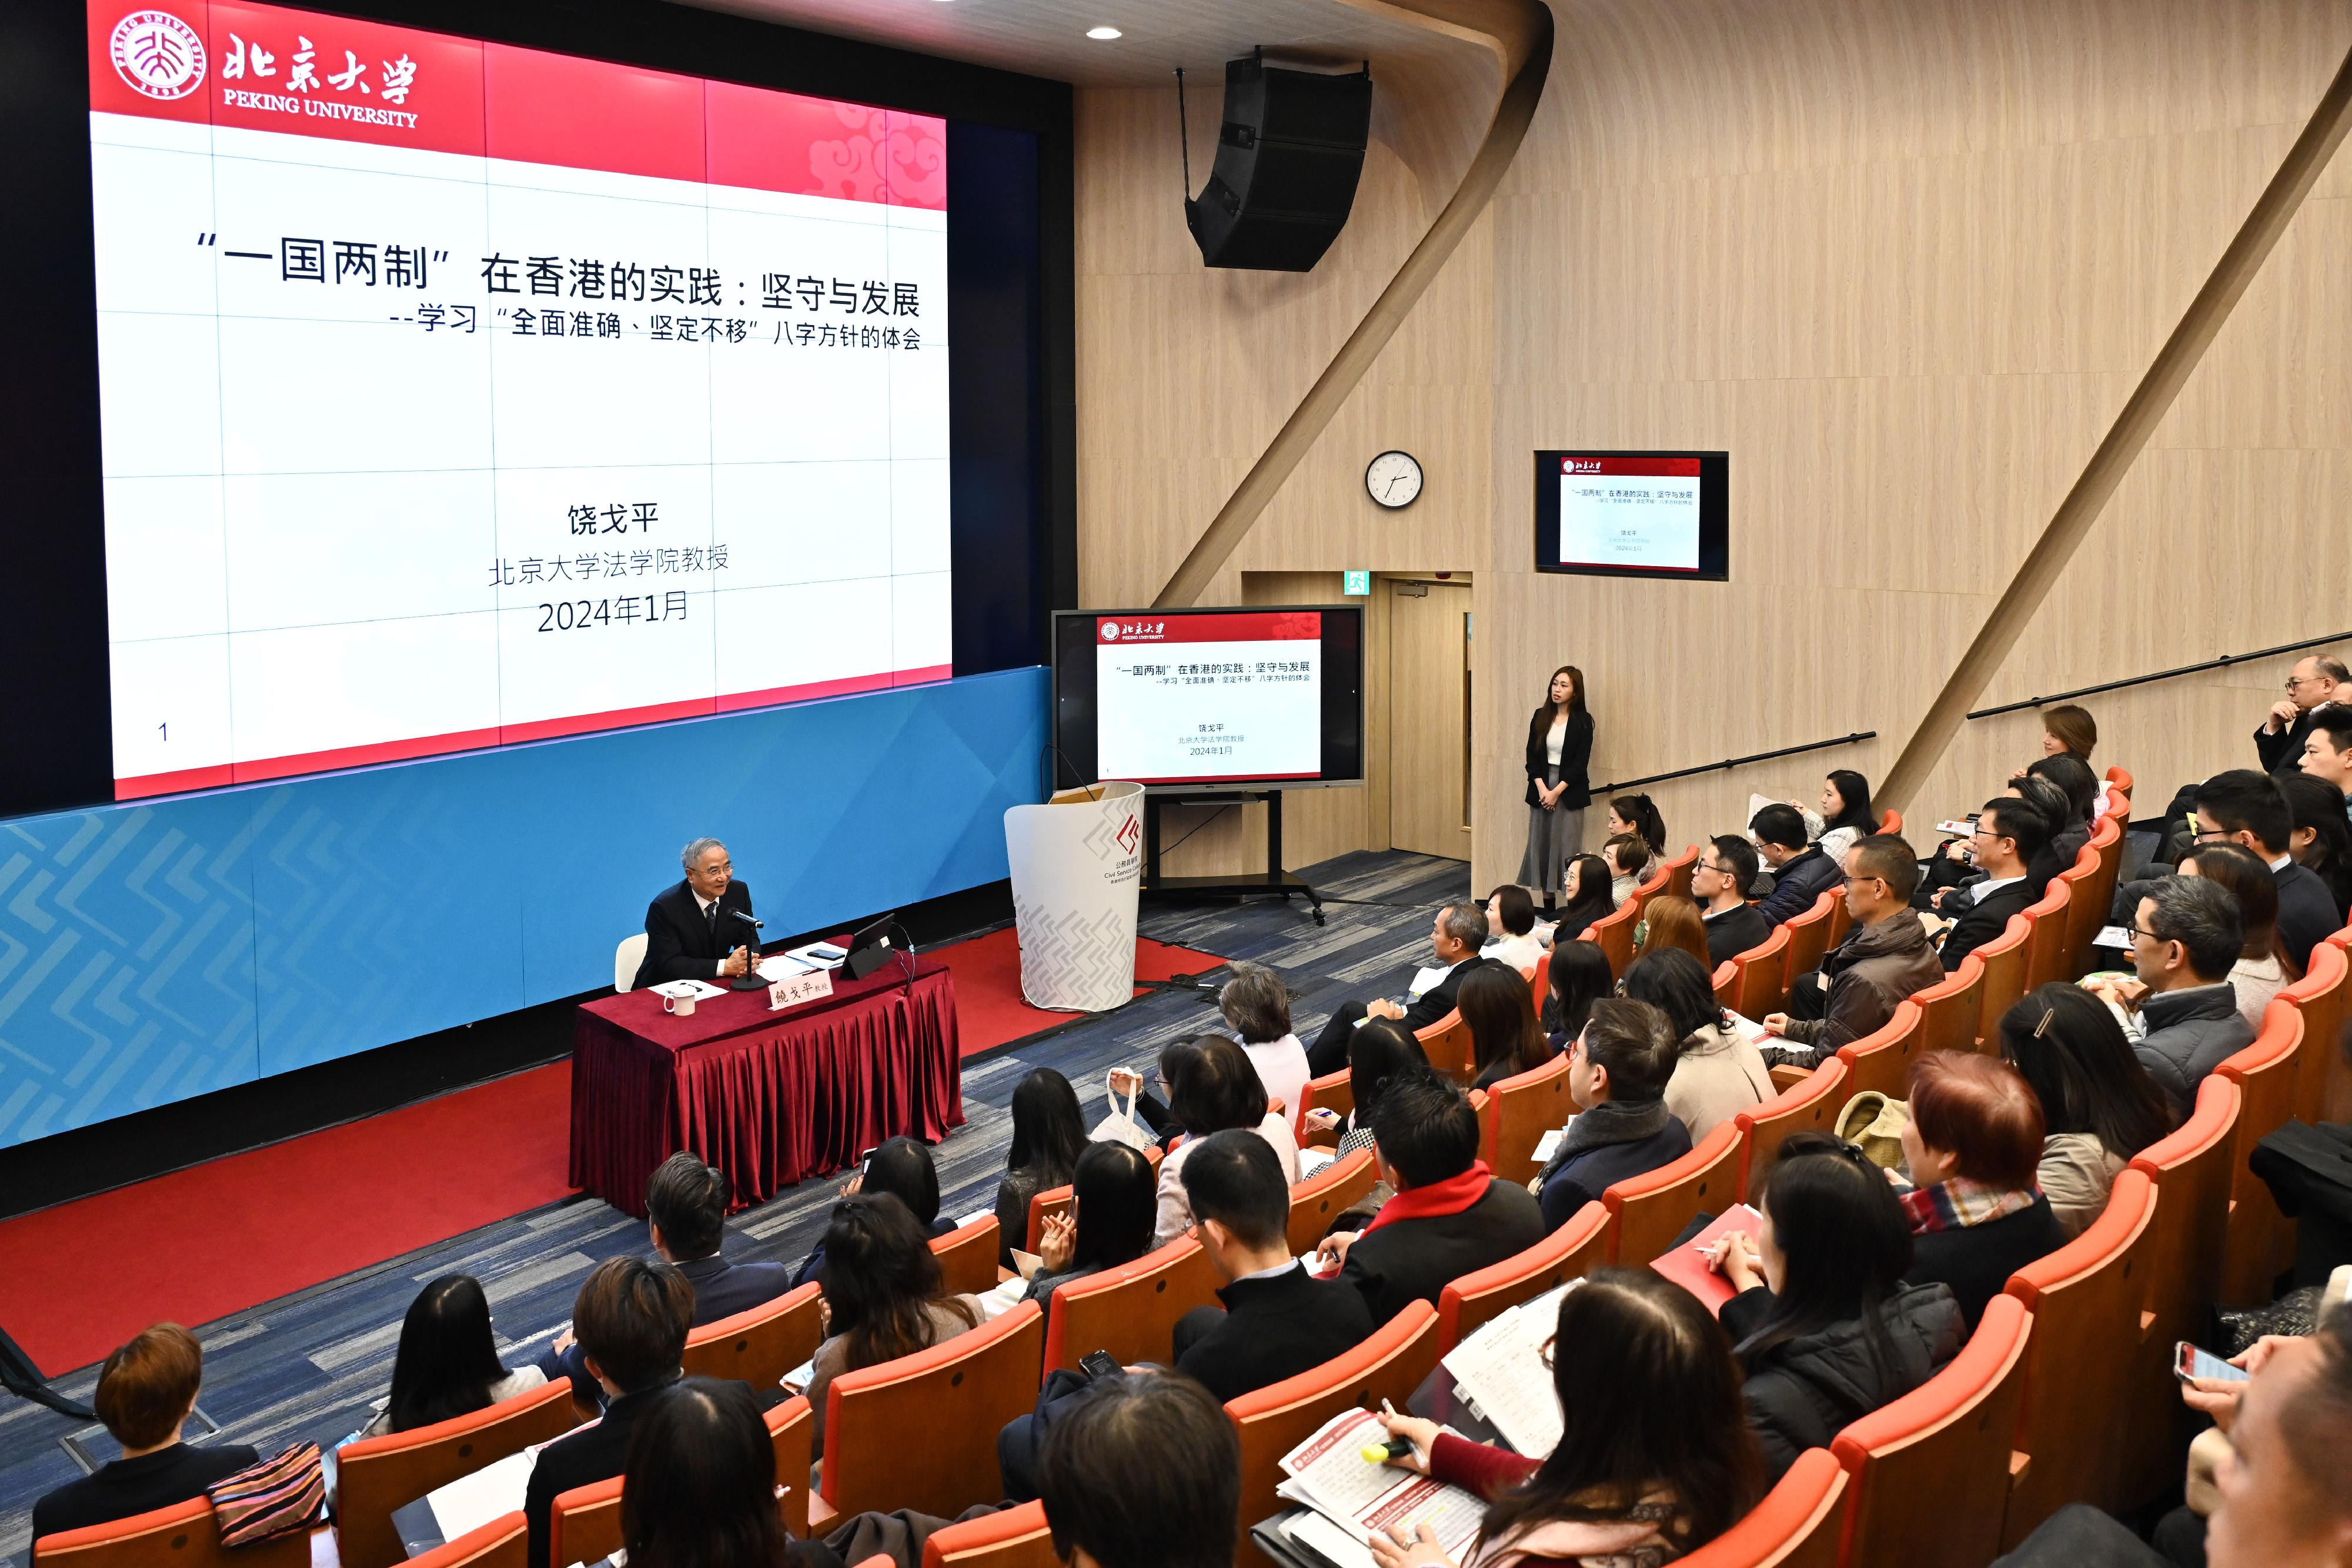 The Civil Service College (CSC), in collaboration with the Institute for Hong Kong and Macau Studies, Peking University, launched an in-depth programme on "one country, two systems" and the contemporary China. As part of the programme, a lecture on the topic of “Upholding the Principle and Promoting the Development of ‘One Country, Two Systems’” was held at the CSC today (January 23). Around 70 civil servants at the rank of Directorate Pay Scale Point 1 and 2 attended the in-depth programme. In addition, about 110 politically appointed officials and other directorate officers enrolled and sat in on the lecture via video conferencing.